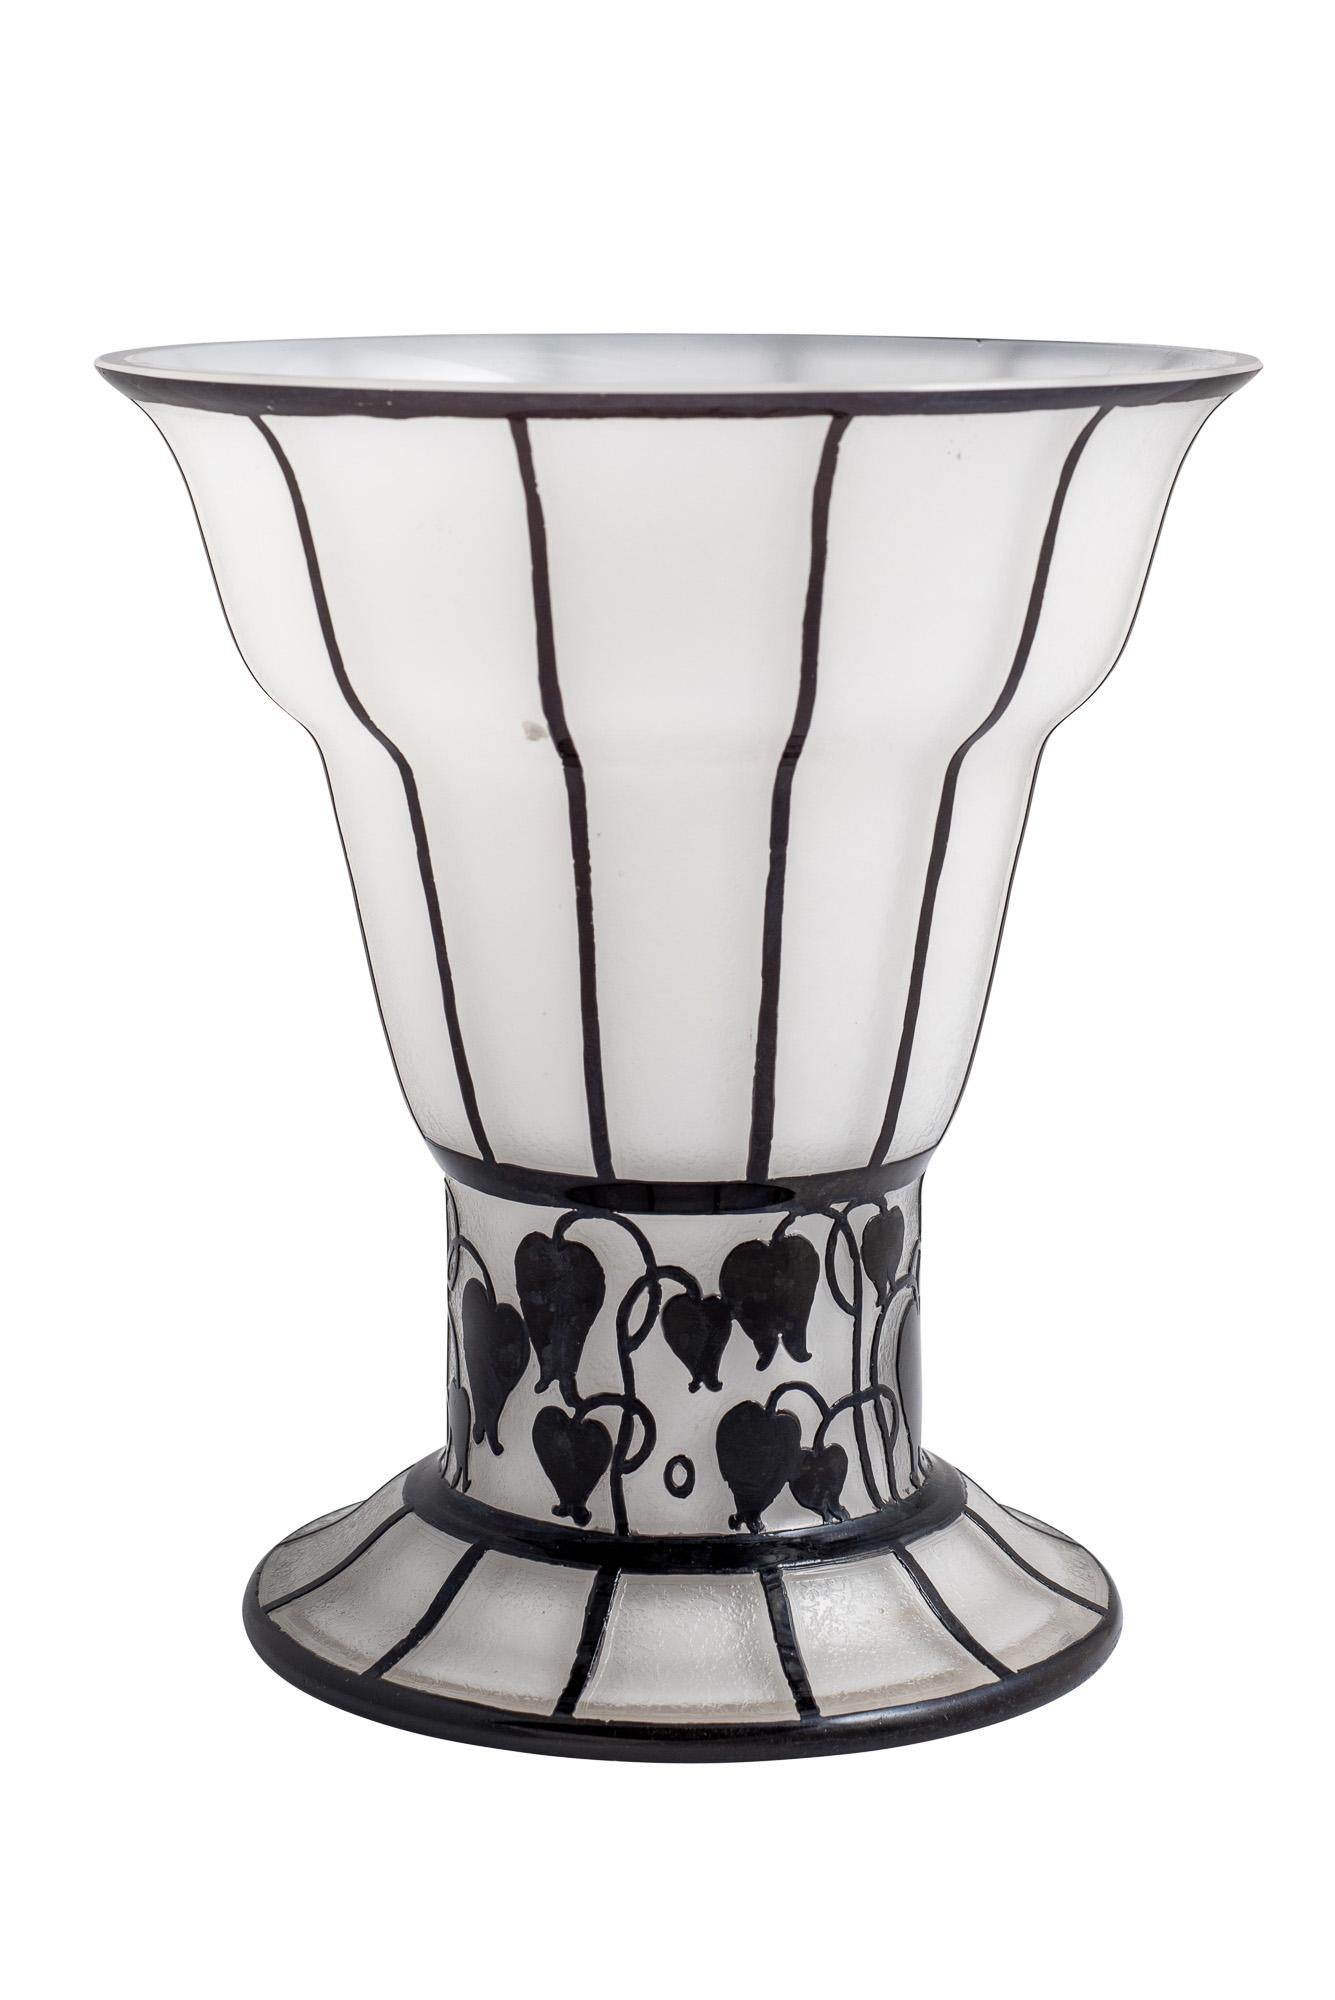 Austrian Jugendstil glass goblet with etched decoration Opel black ca. 1915 designed by Hans Bolek manufactured by Johann Loetz Witwe

Between 1912 and 1917, the architect Hans Bolek supplied numerous form and decor designs for the glass